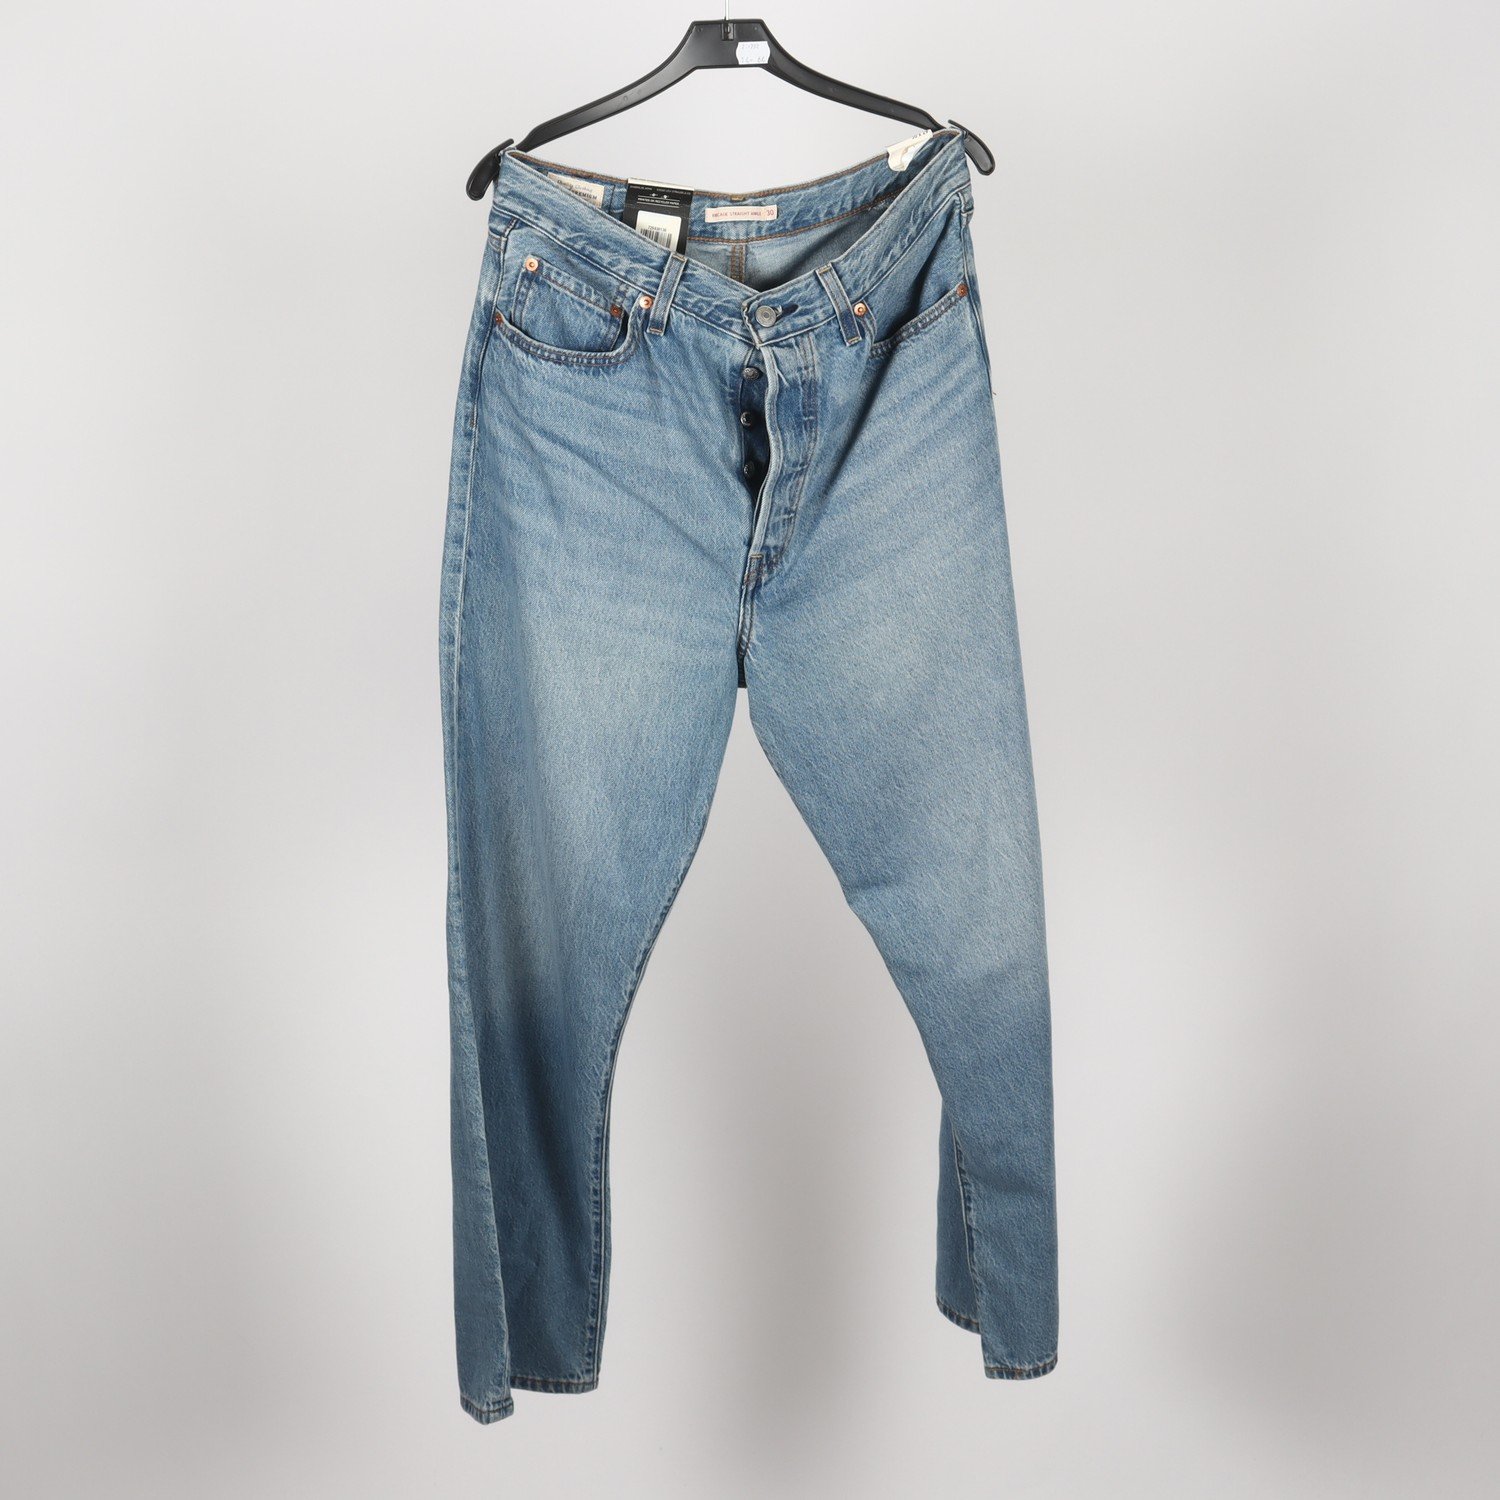 Jeans, Levi’s Ribcage Straight Ankle, stl. 30/29